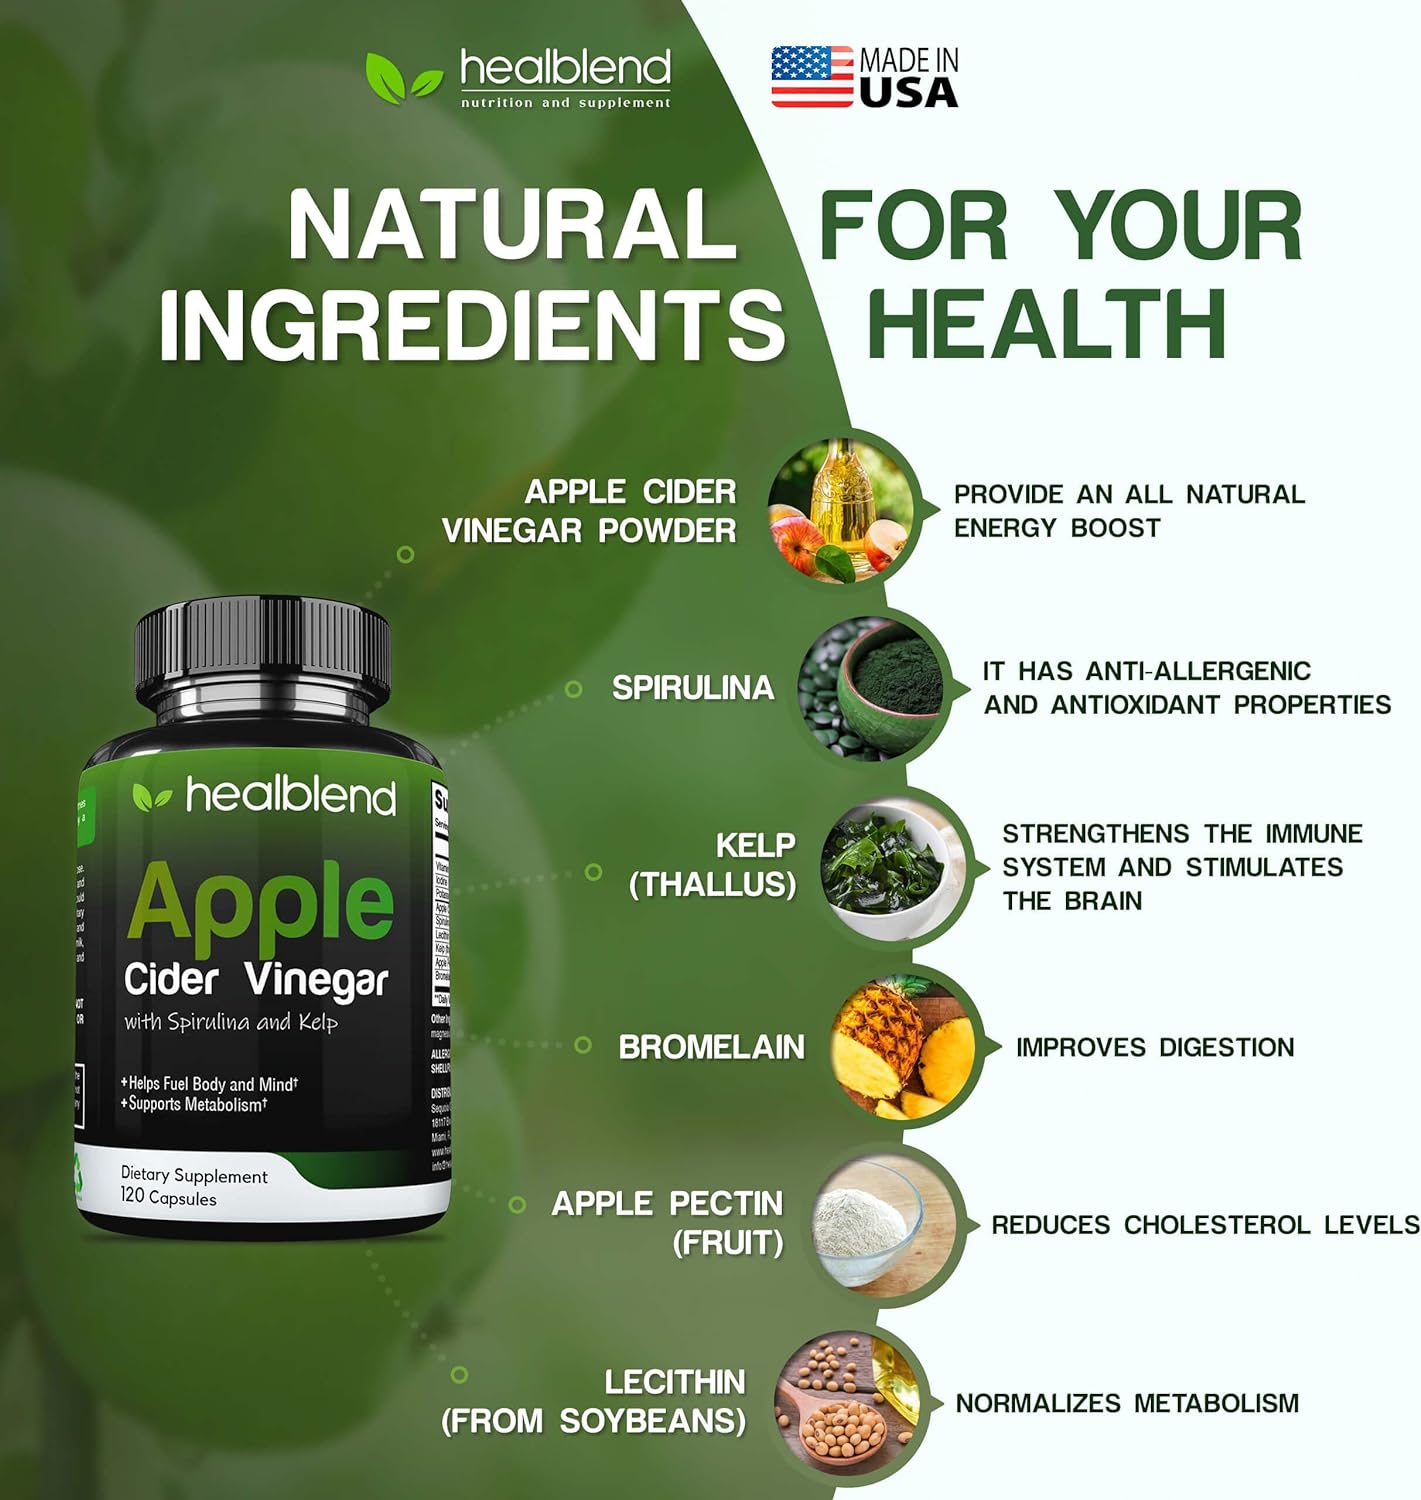 ACV with Spirulina & Womens Support